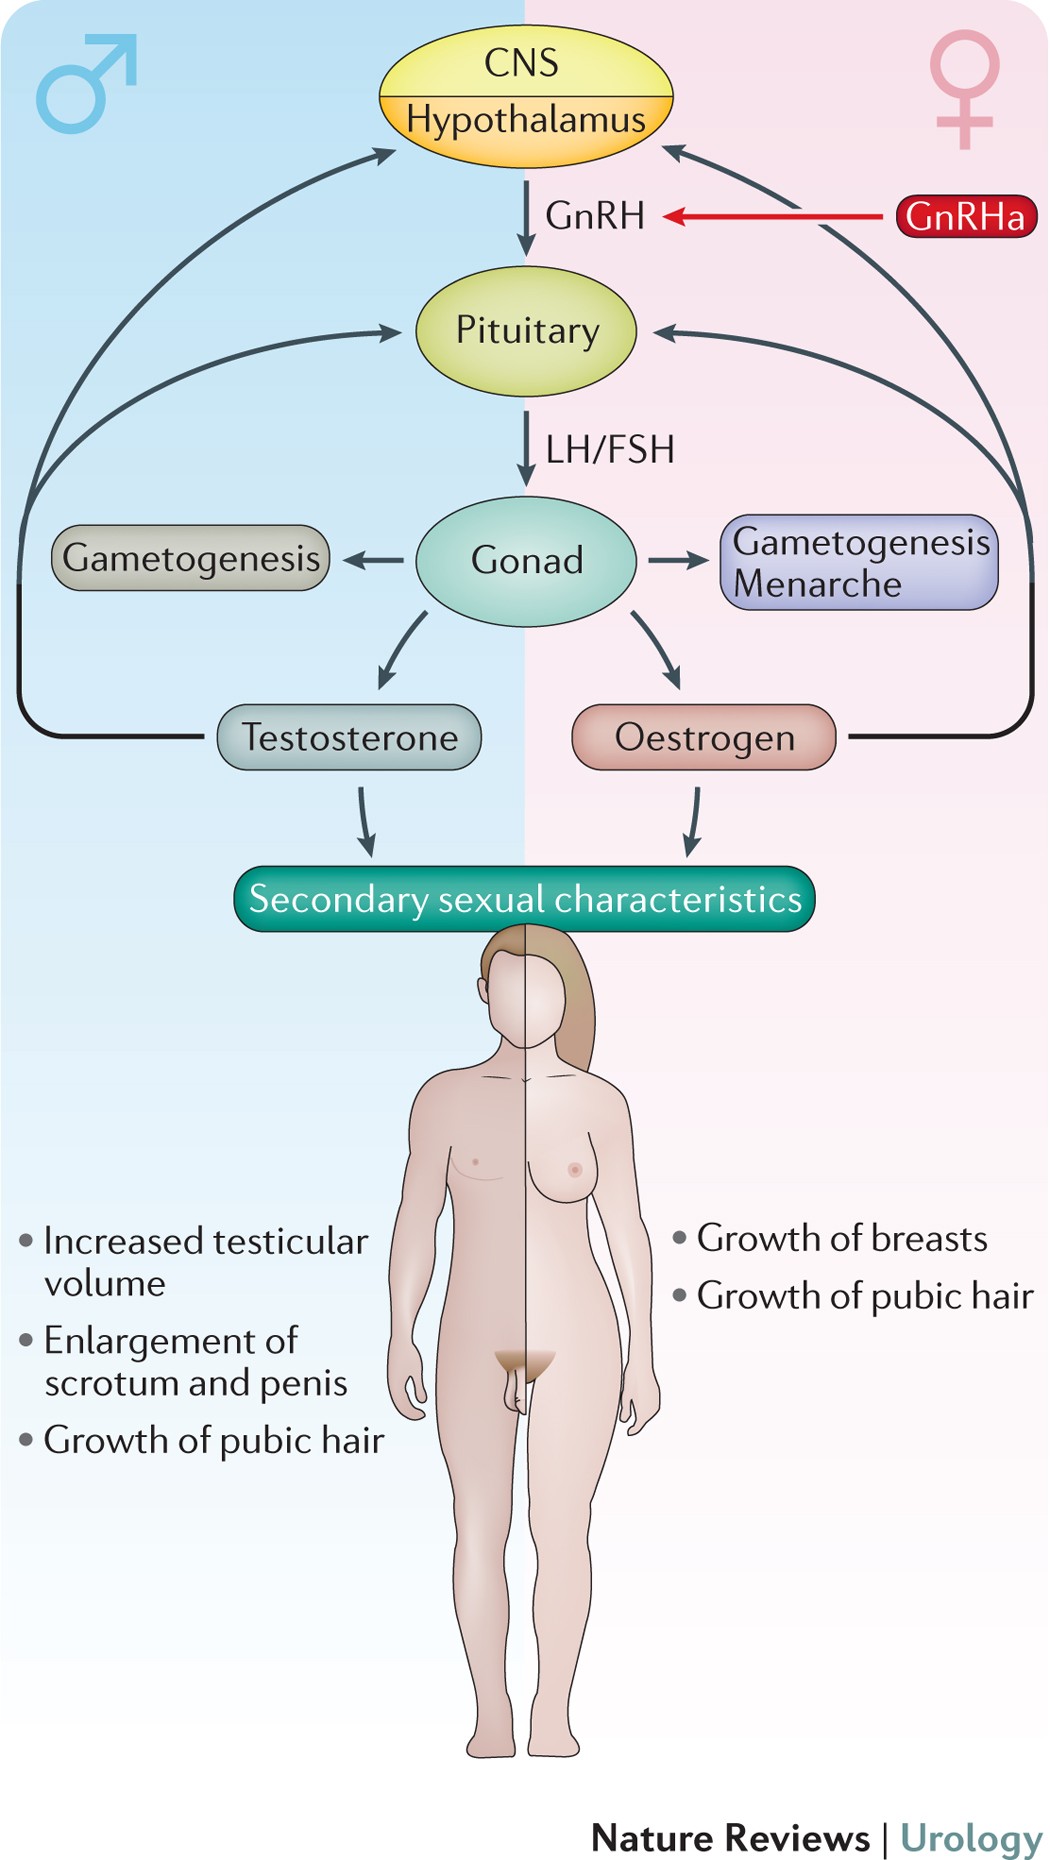 To treat or not to treat puberty suppression in childhood-onset gender dysphoria Nature Reviews Urology